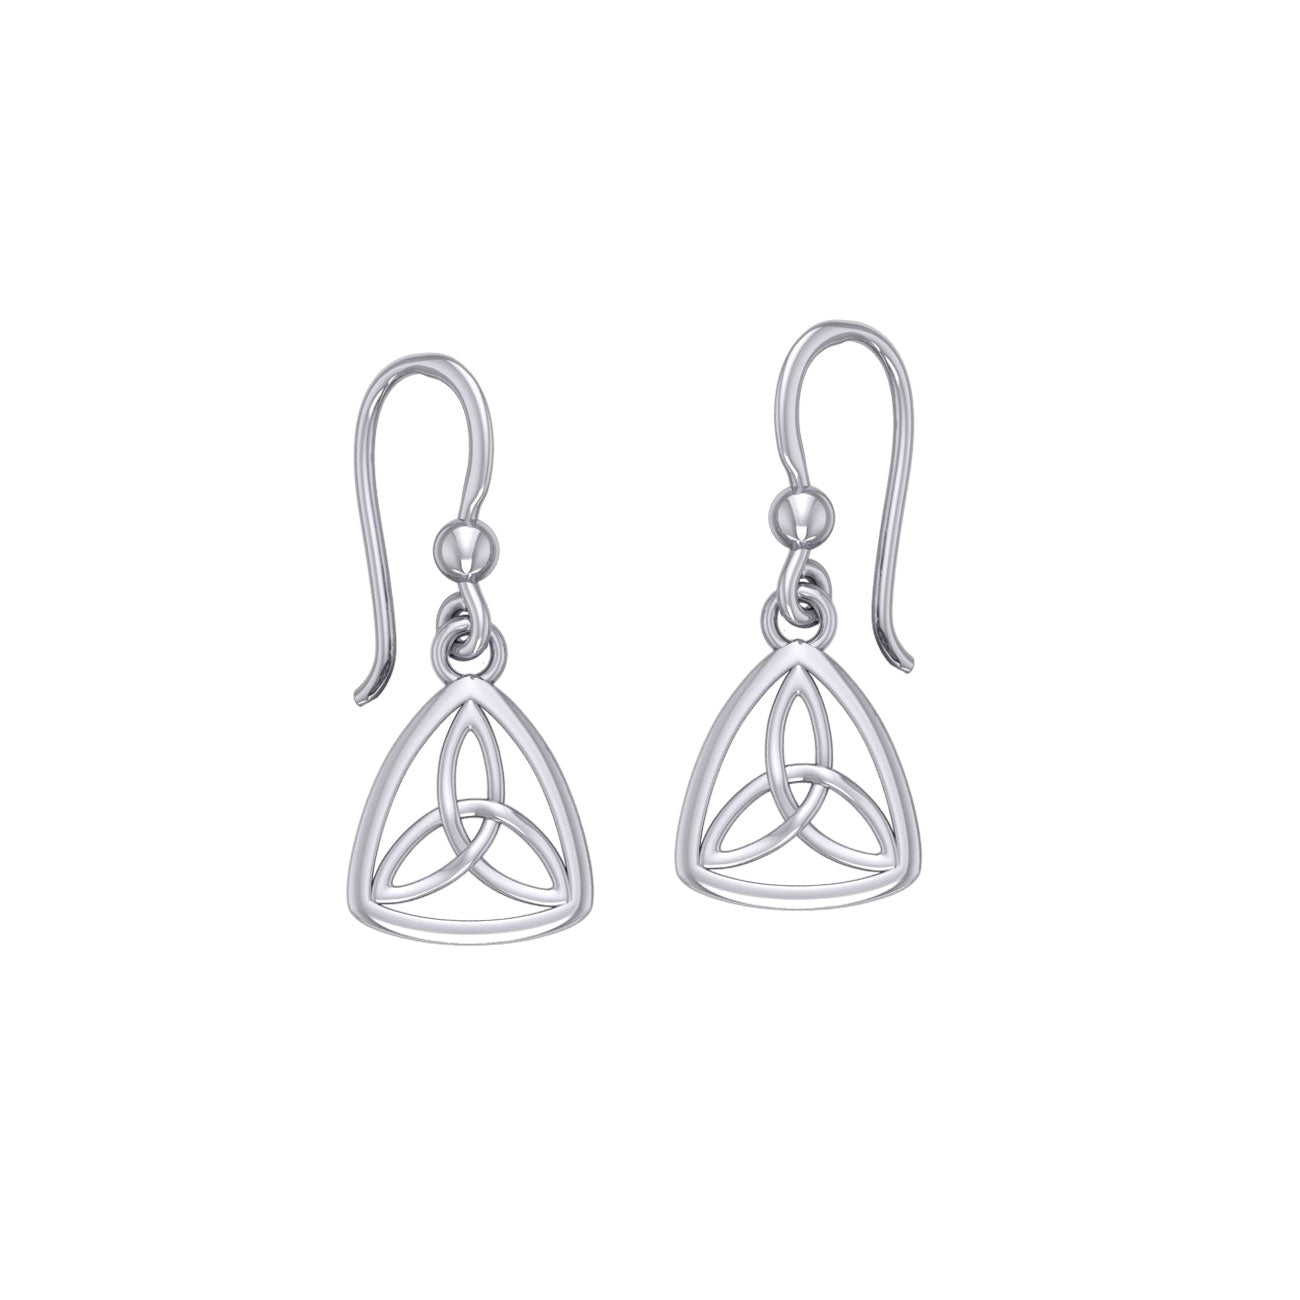 Adorned by the timeless Celtic Triquetra ~ Sterling Silver Jewelry Dangling Earrings TE745